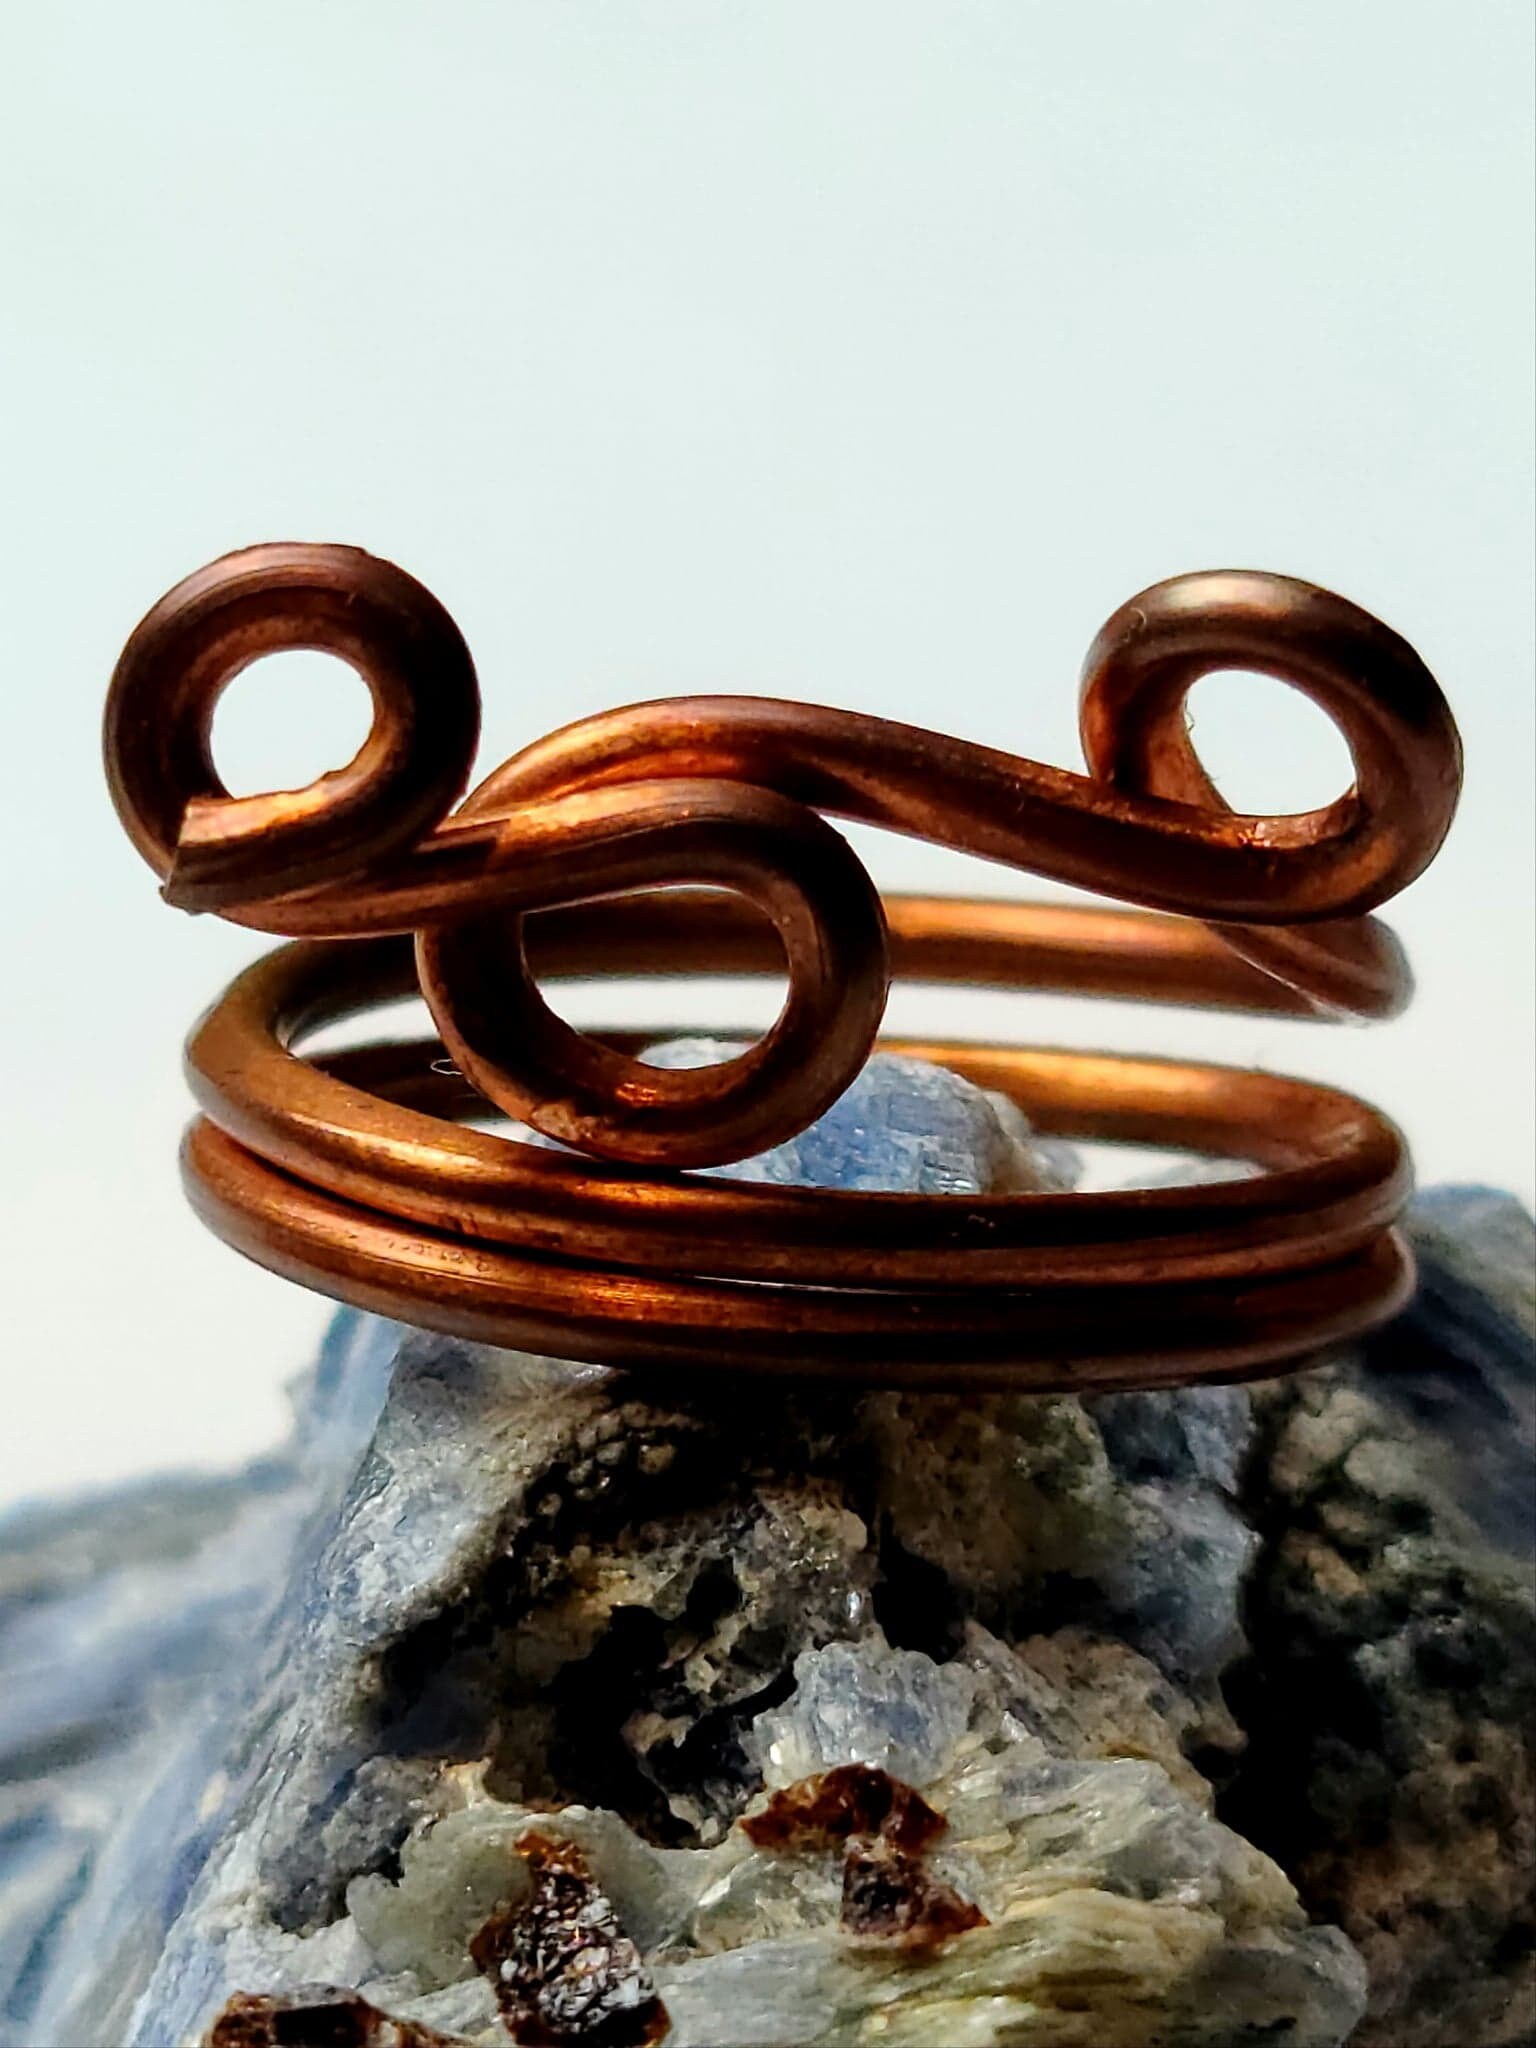 Copper Ring Circulation Healing Arthritis Ring Wollet Magnet Ring  Adjustable for Arthritis Unisex Magnet Therapy Ring - Walmart.com